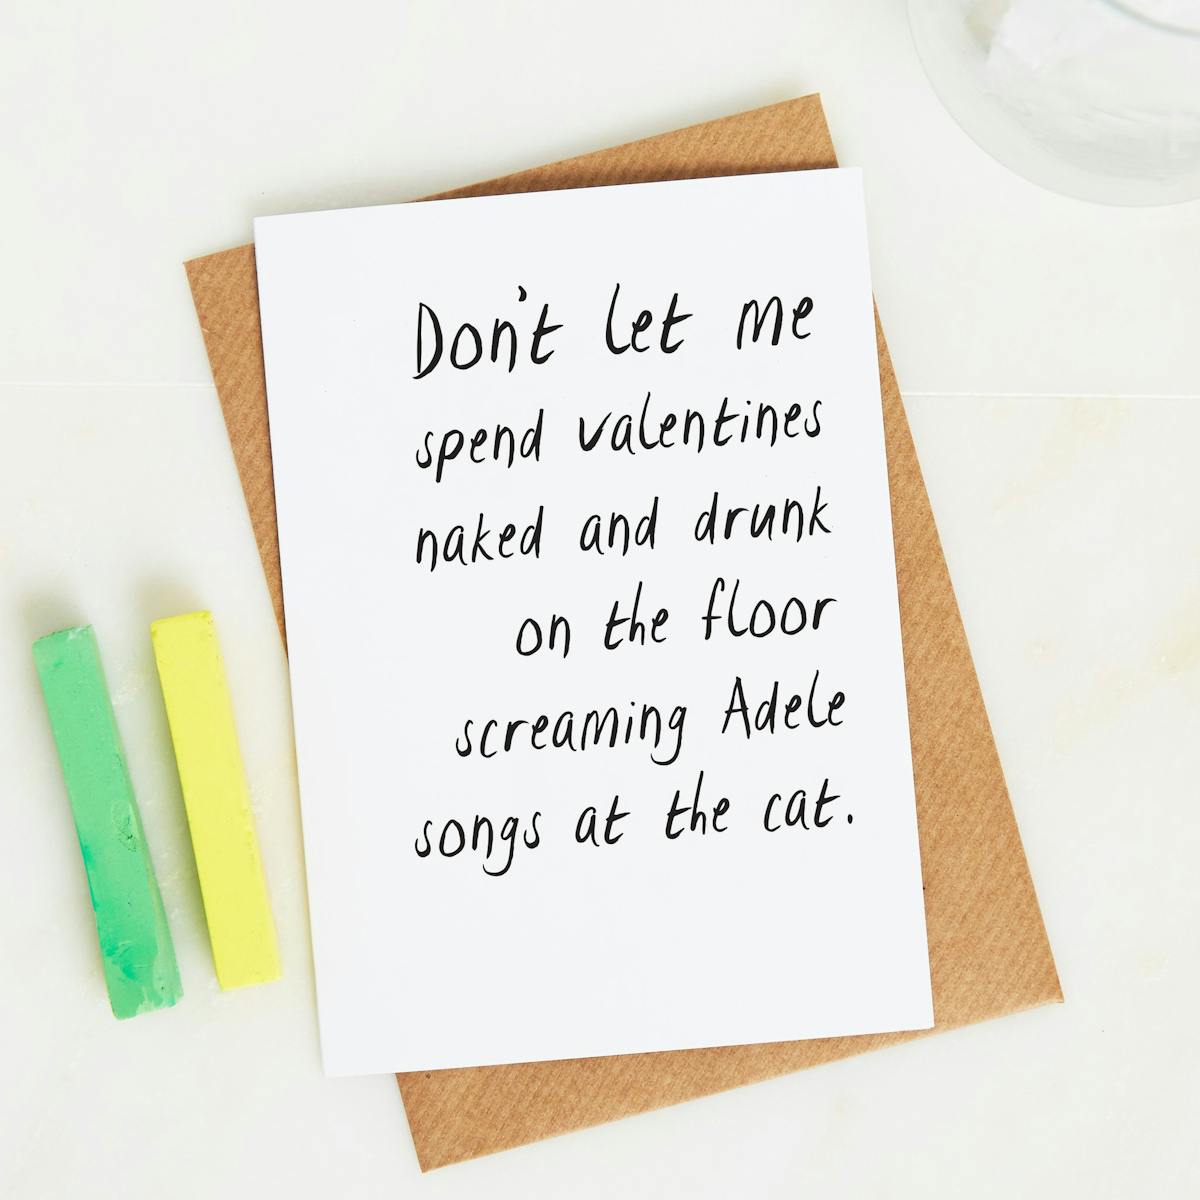 Funny, silly anti-valentine's and galentine's day cards